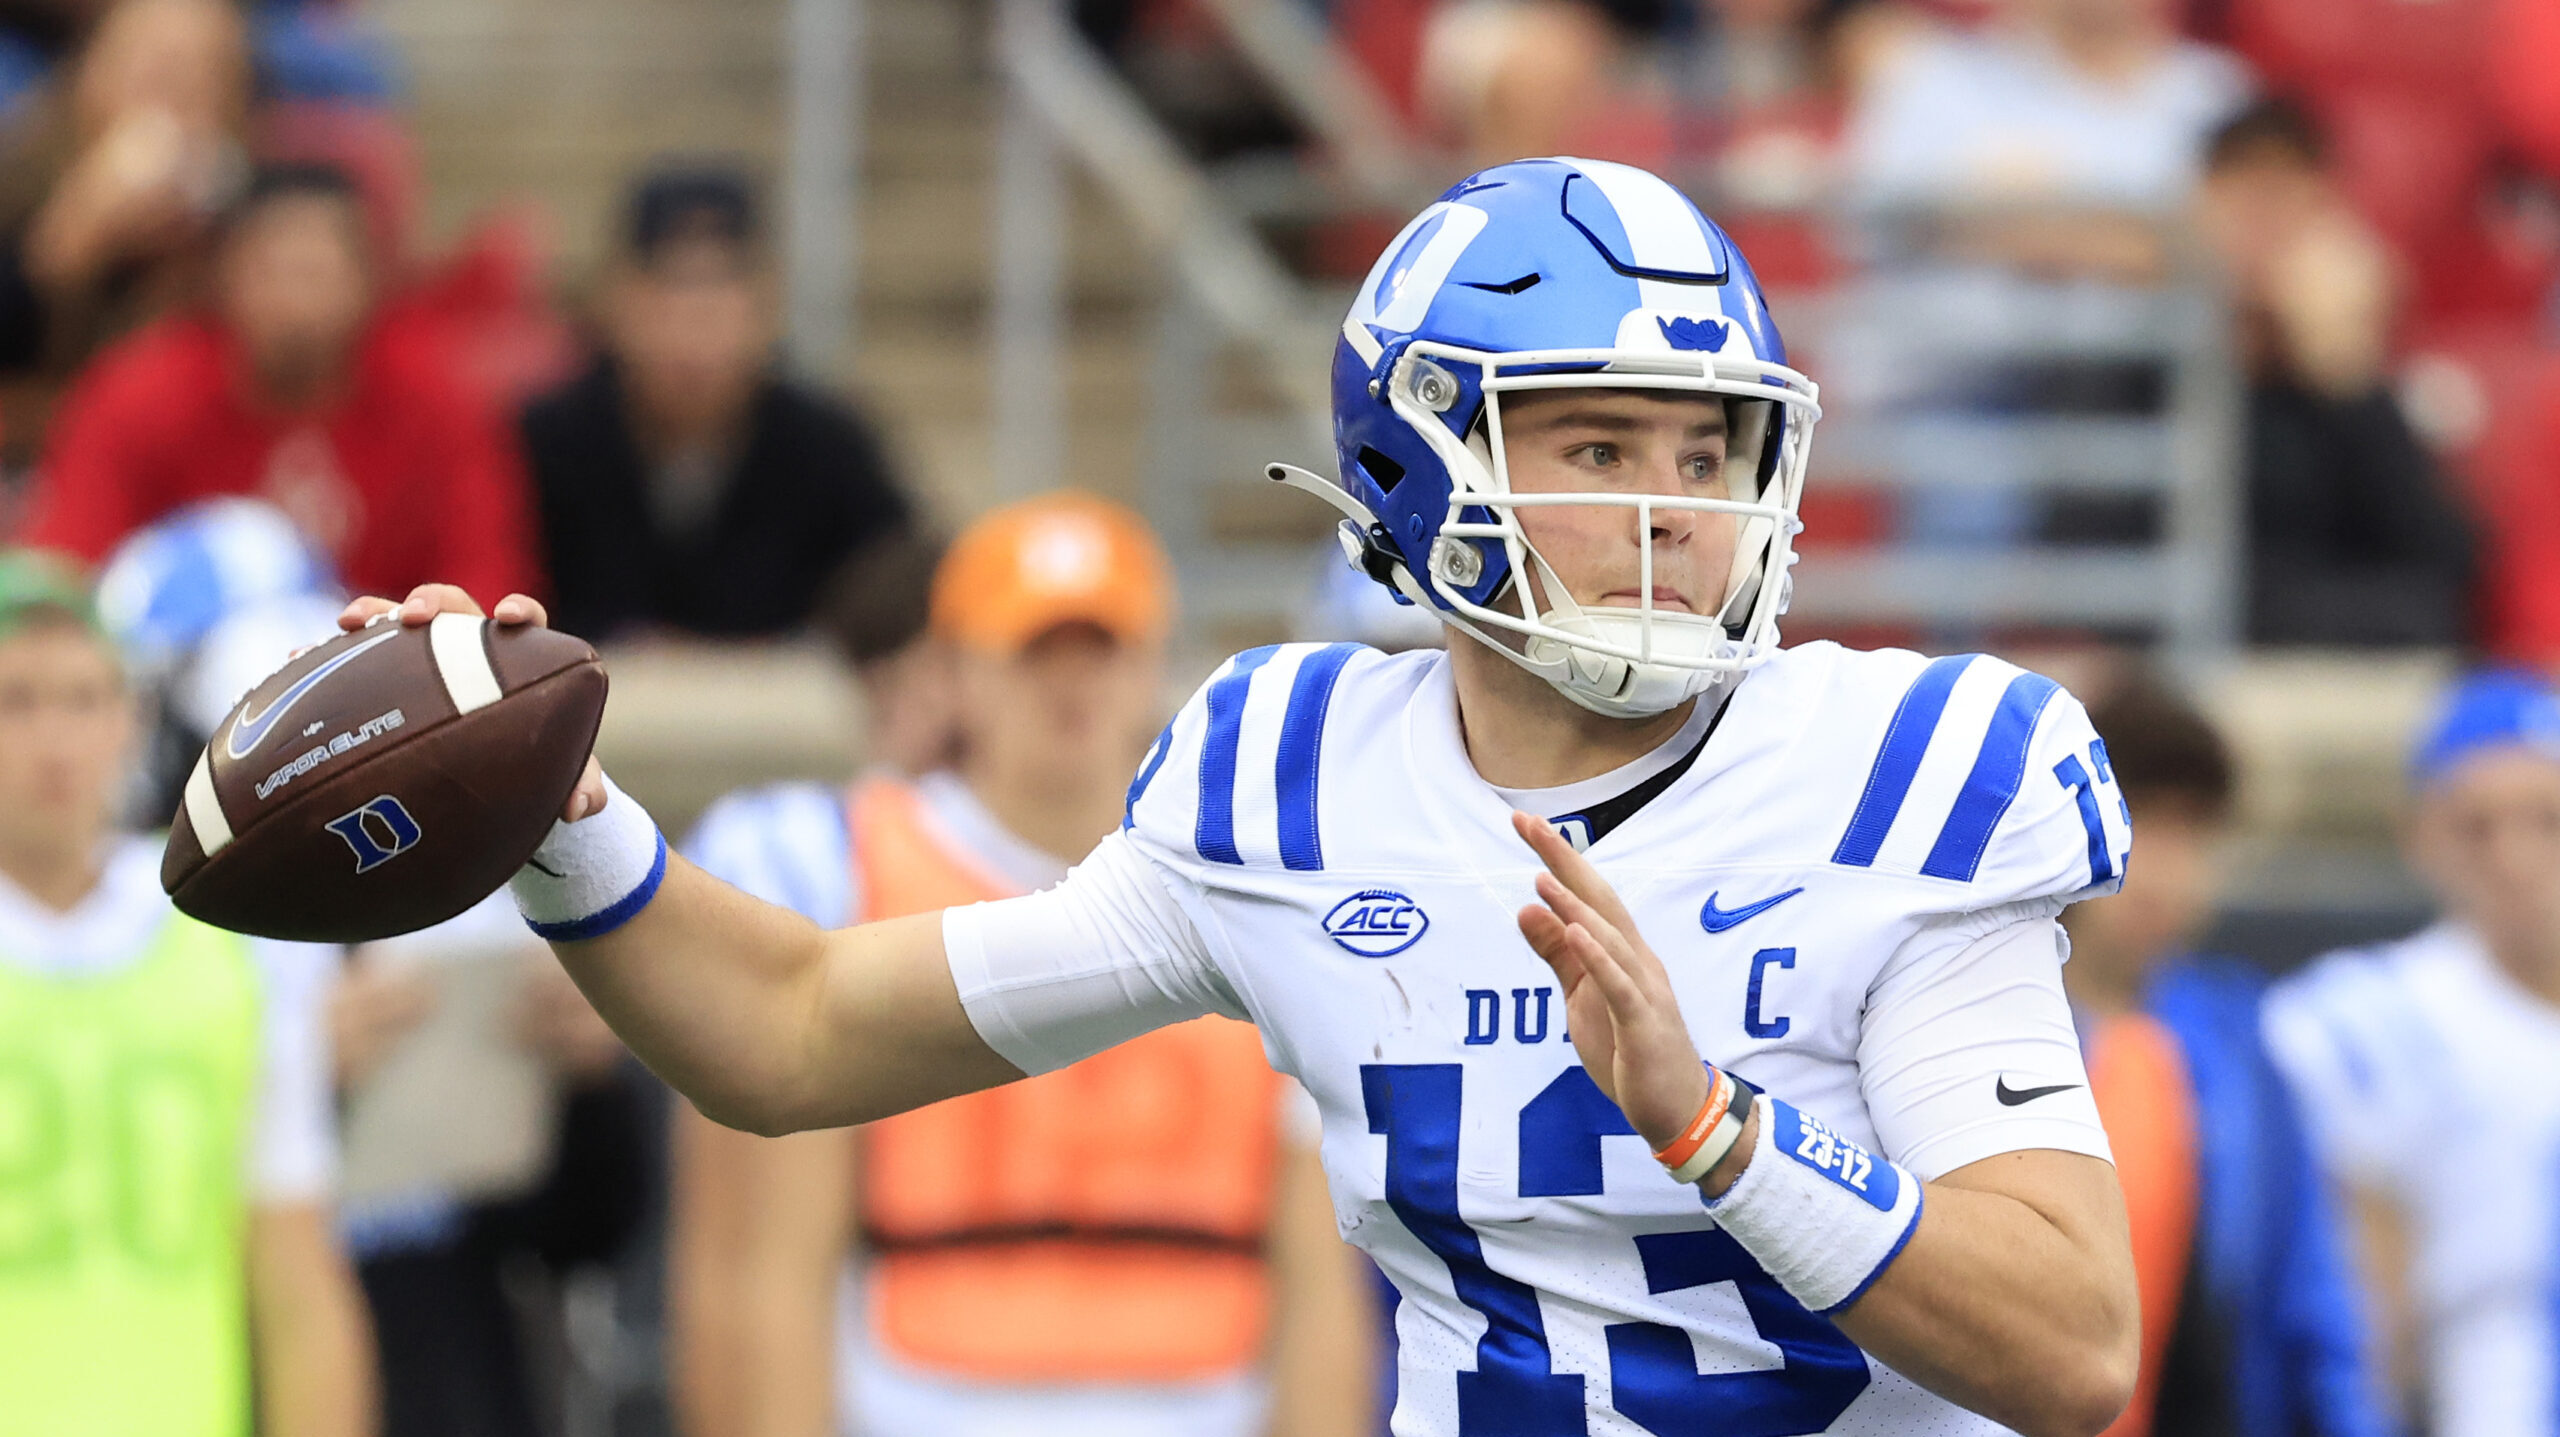 Transfers: former Duke QB Riley Leonard to Notre Dame; former Purdue WR  Burks to Oklahoma - Indianapolis News, Indiana Weather, Indiana Traffic, WISH-TV